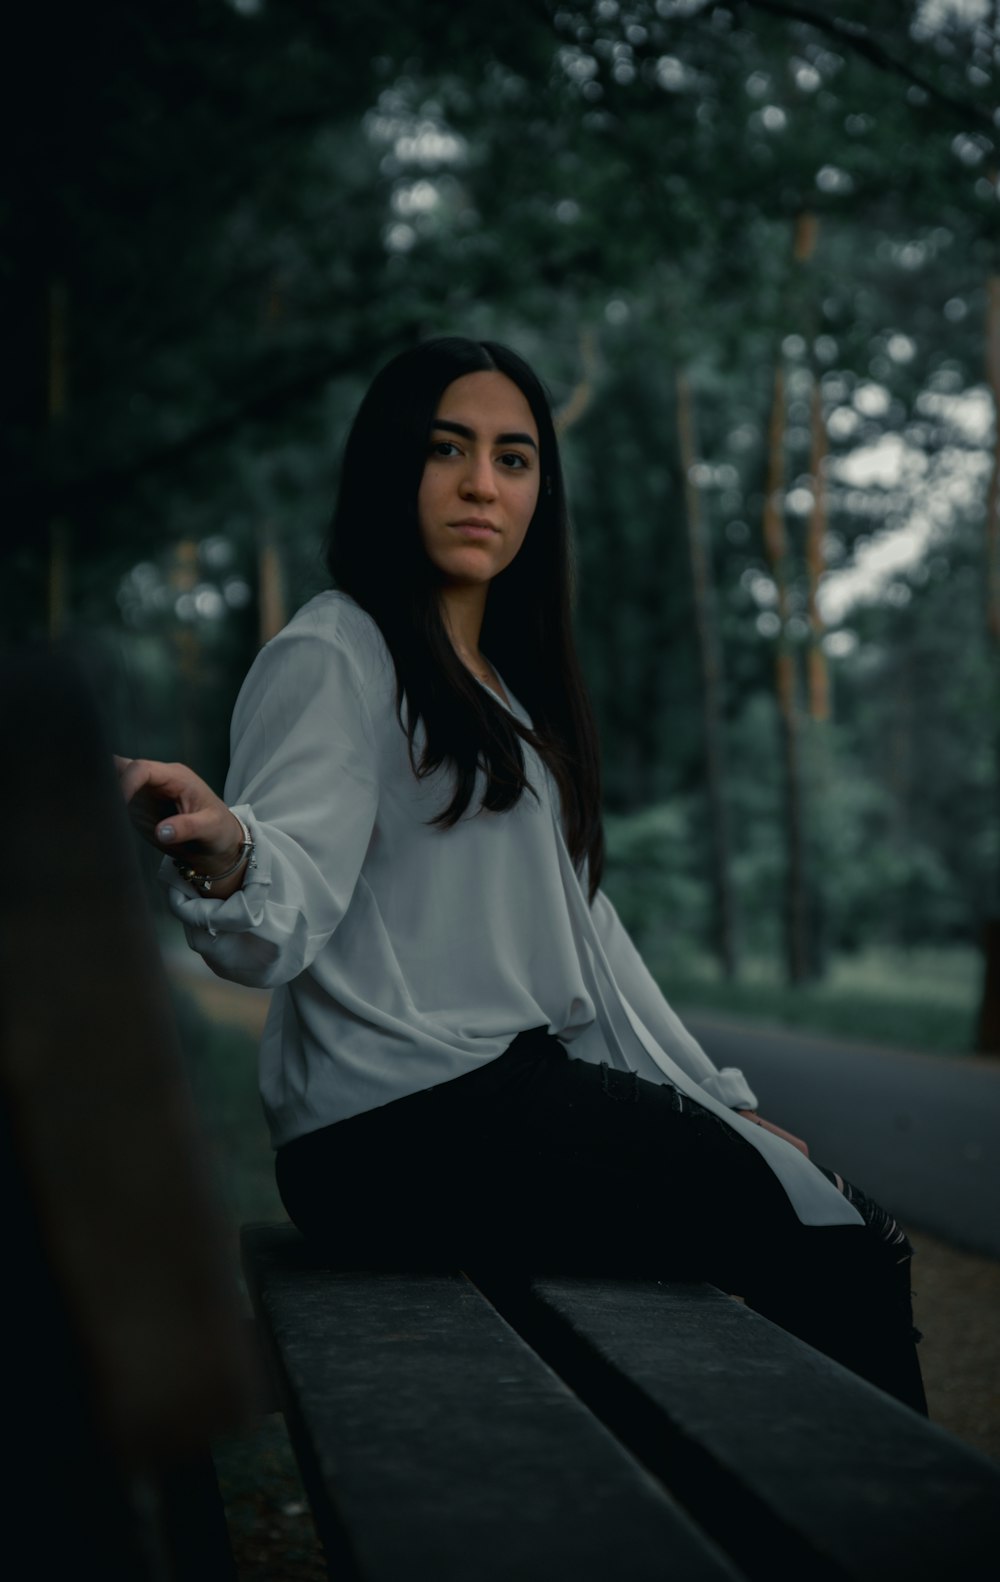 woman in white long sleeve shirt and black skirt sitting on brown wooden bench during daytime